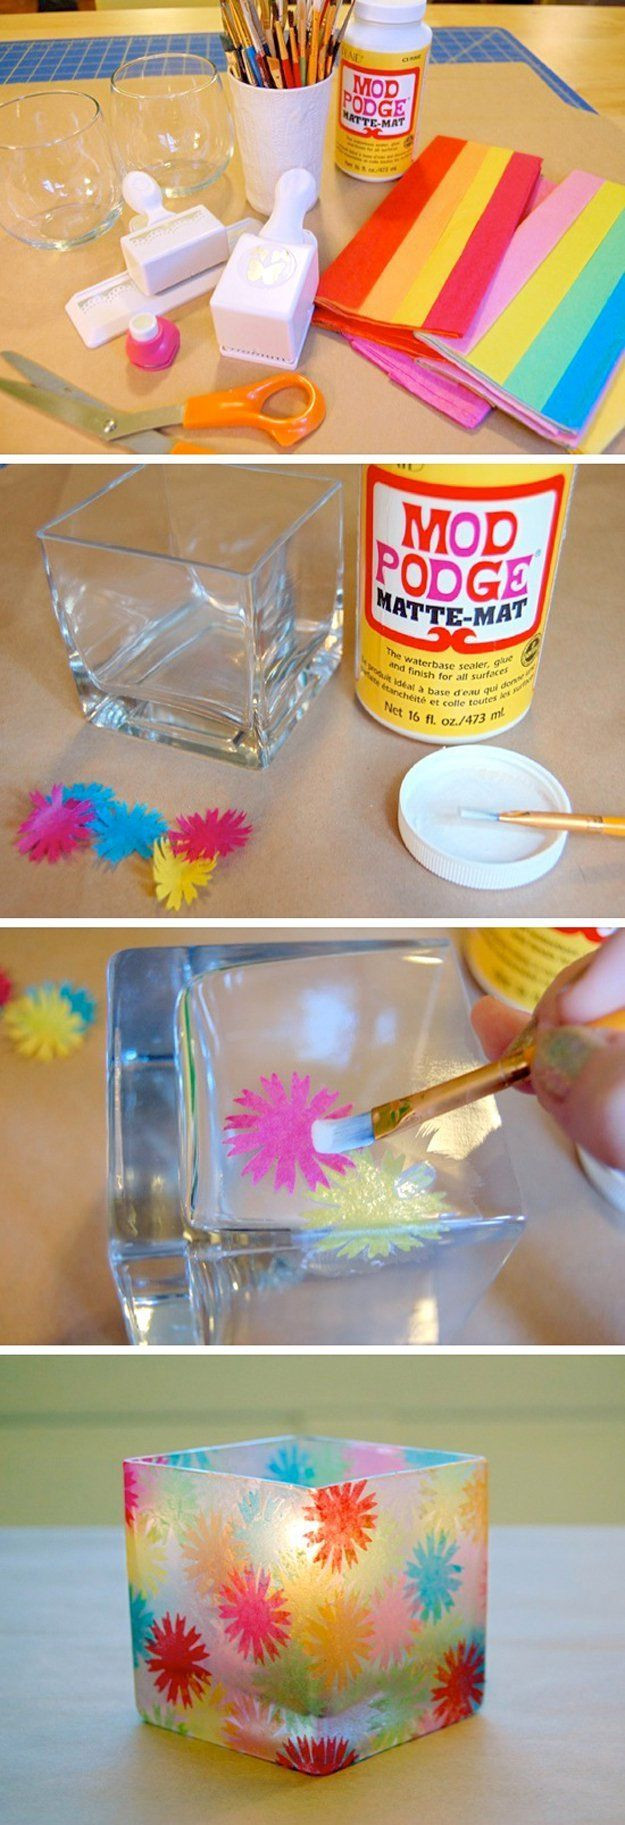 Simple Craft Ideas For Adults
 25 best ideas about Easy Diy Crafts on Pinterest